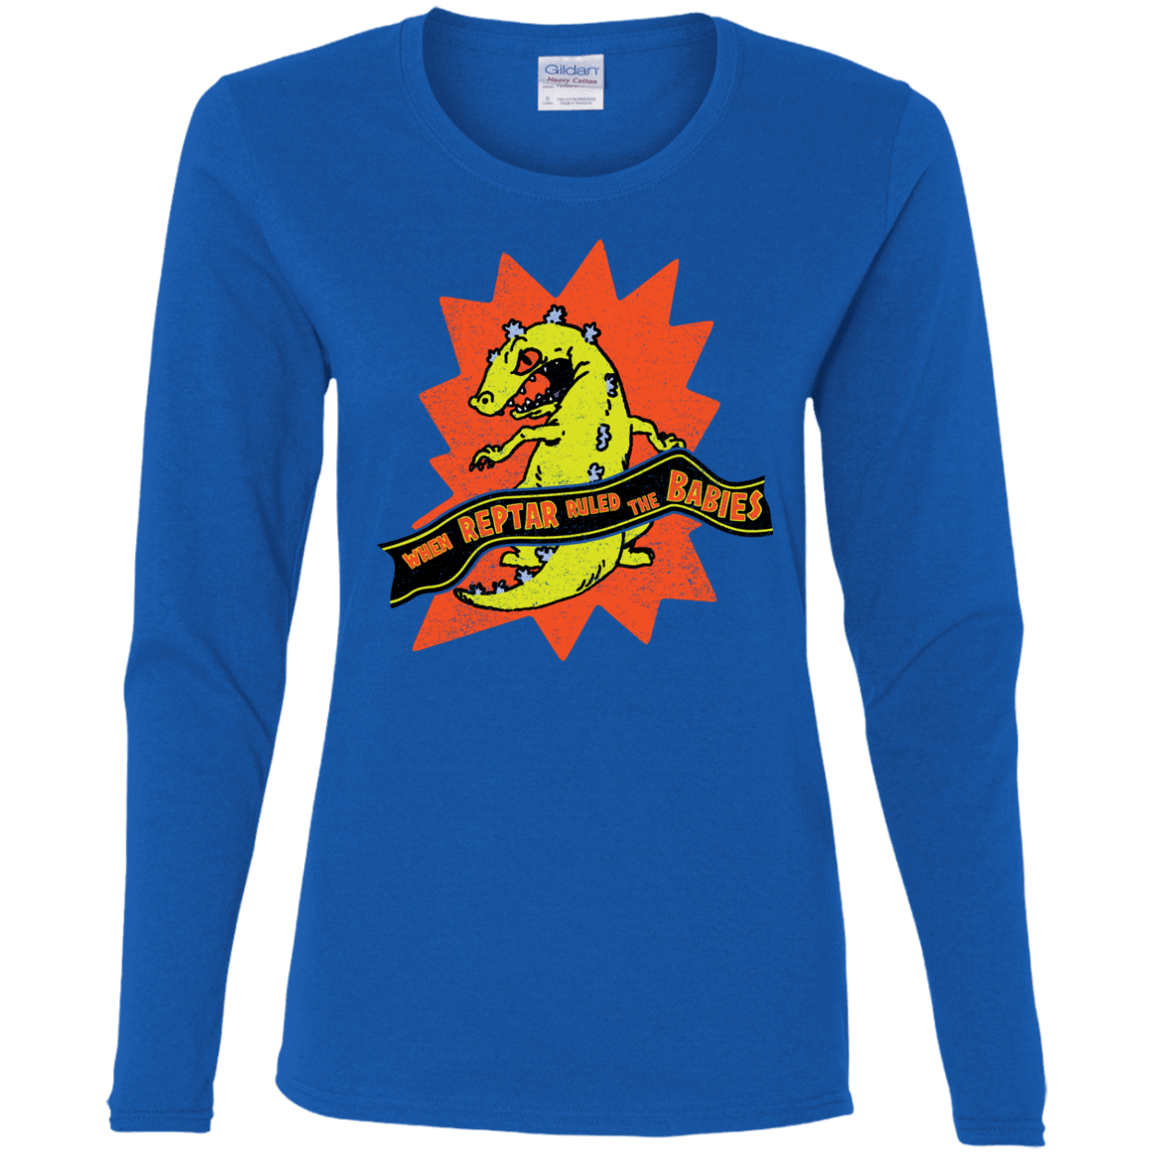 T-Shirts Royal / S When Reptar Ruled The Babies Women's Long Sleeve T-Shirt